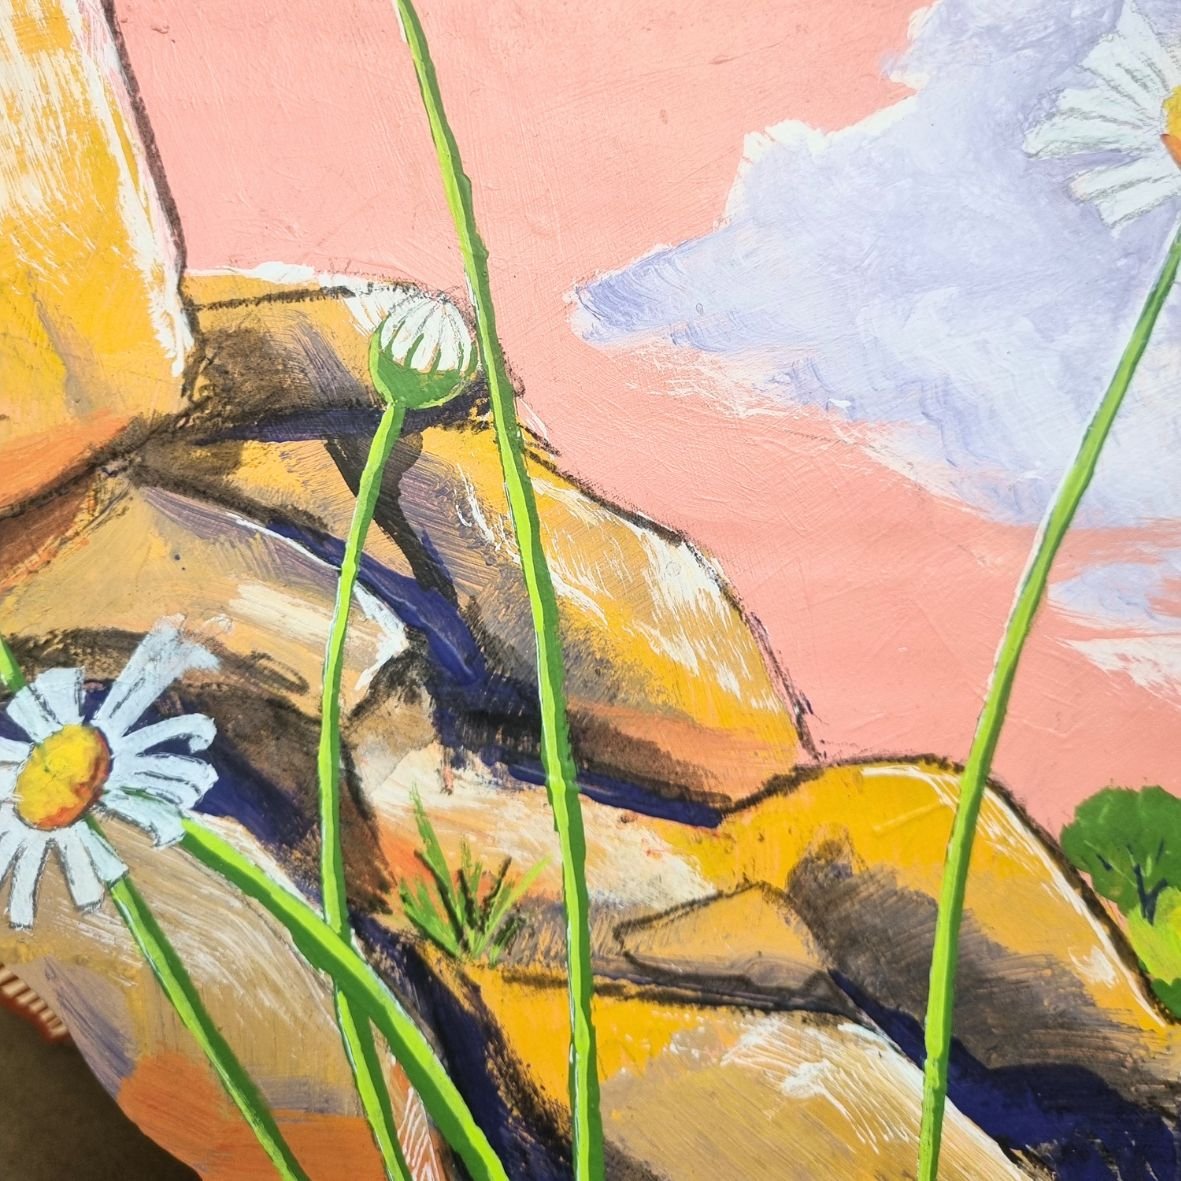 Granite Daisies by the Namoi (Warrabah National Park) , Acrylic Paint